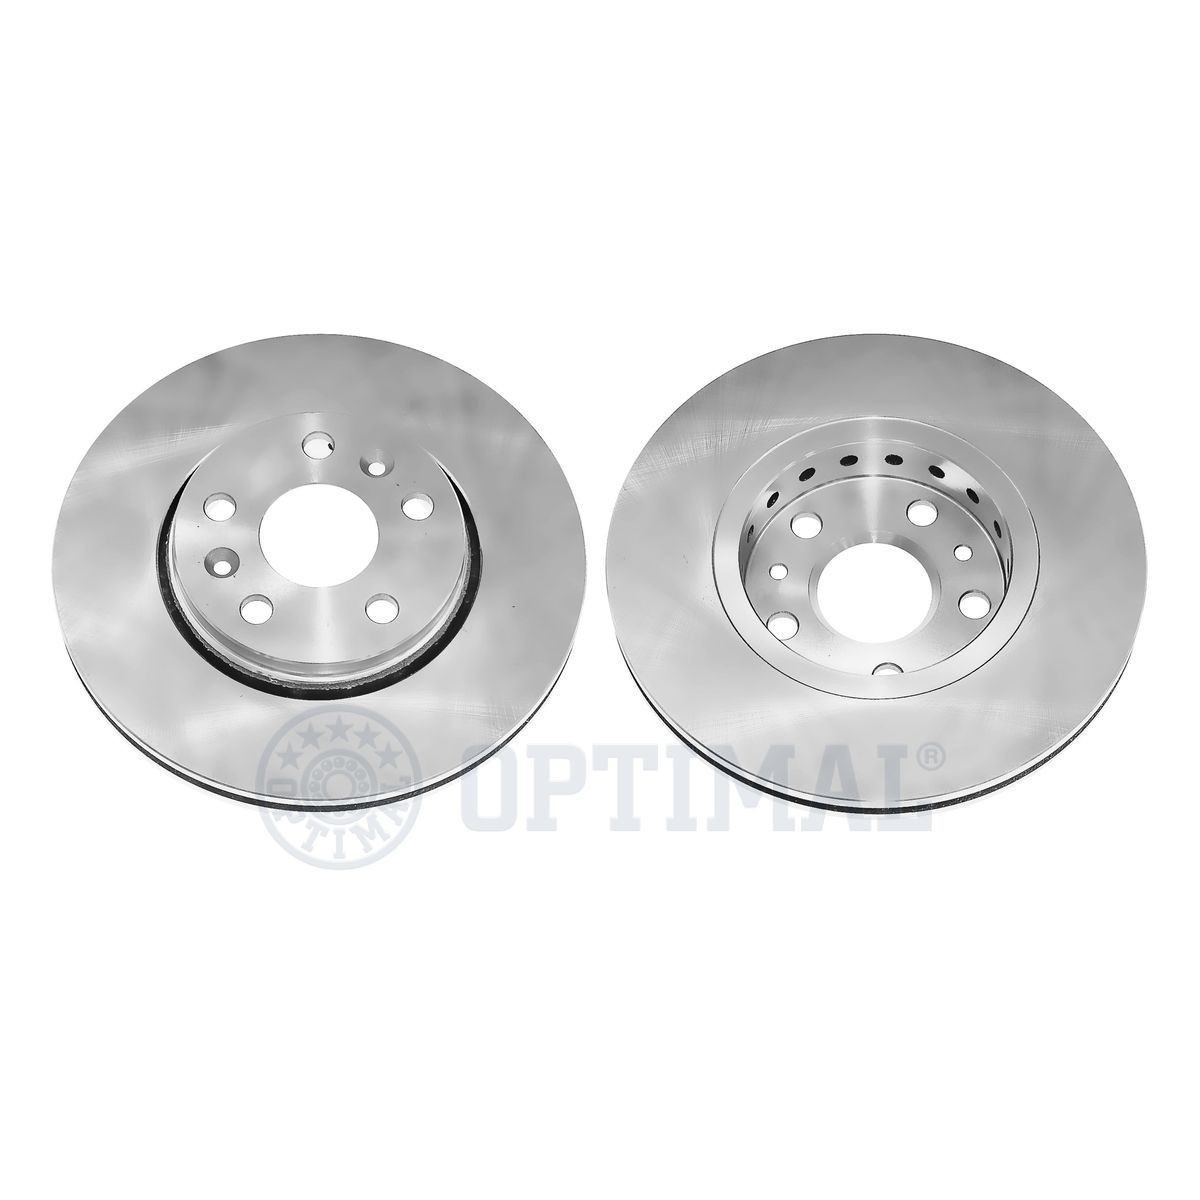 OPTIMAL Front Axle, 280x24mm, 5/7, Vented, Coated Ø: 280mm, Brake Disc Thickness: 24mm Brake rotor BS-8680C buy